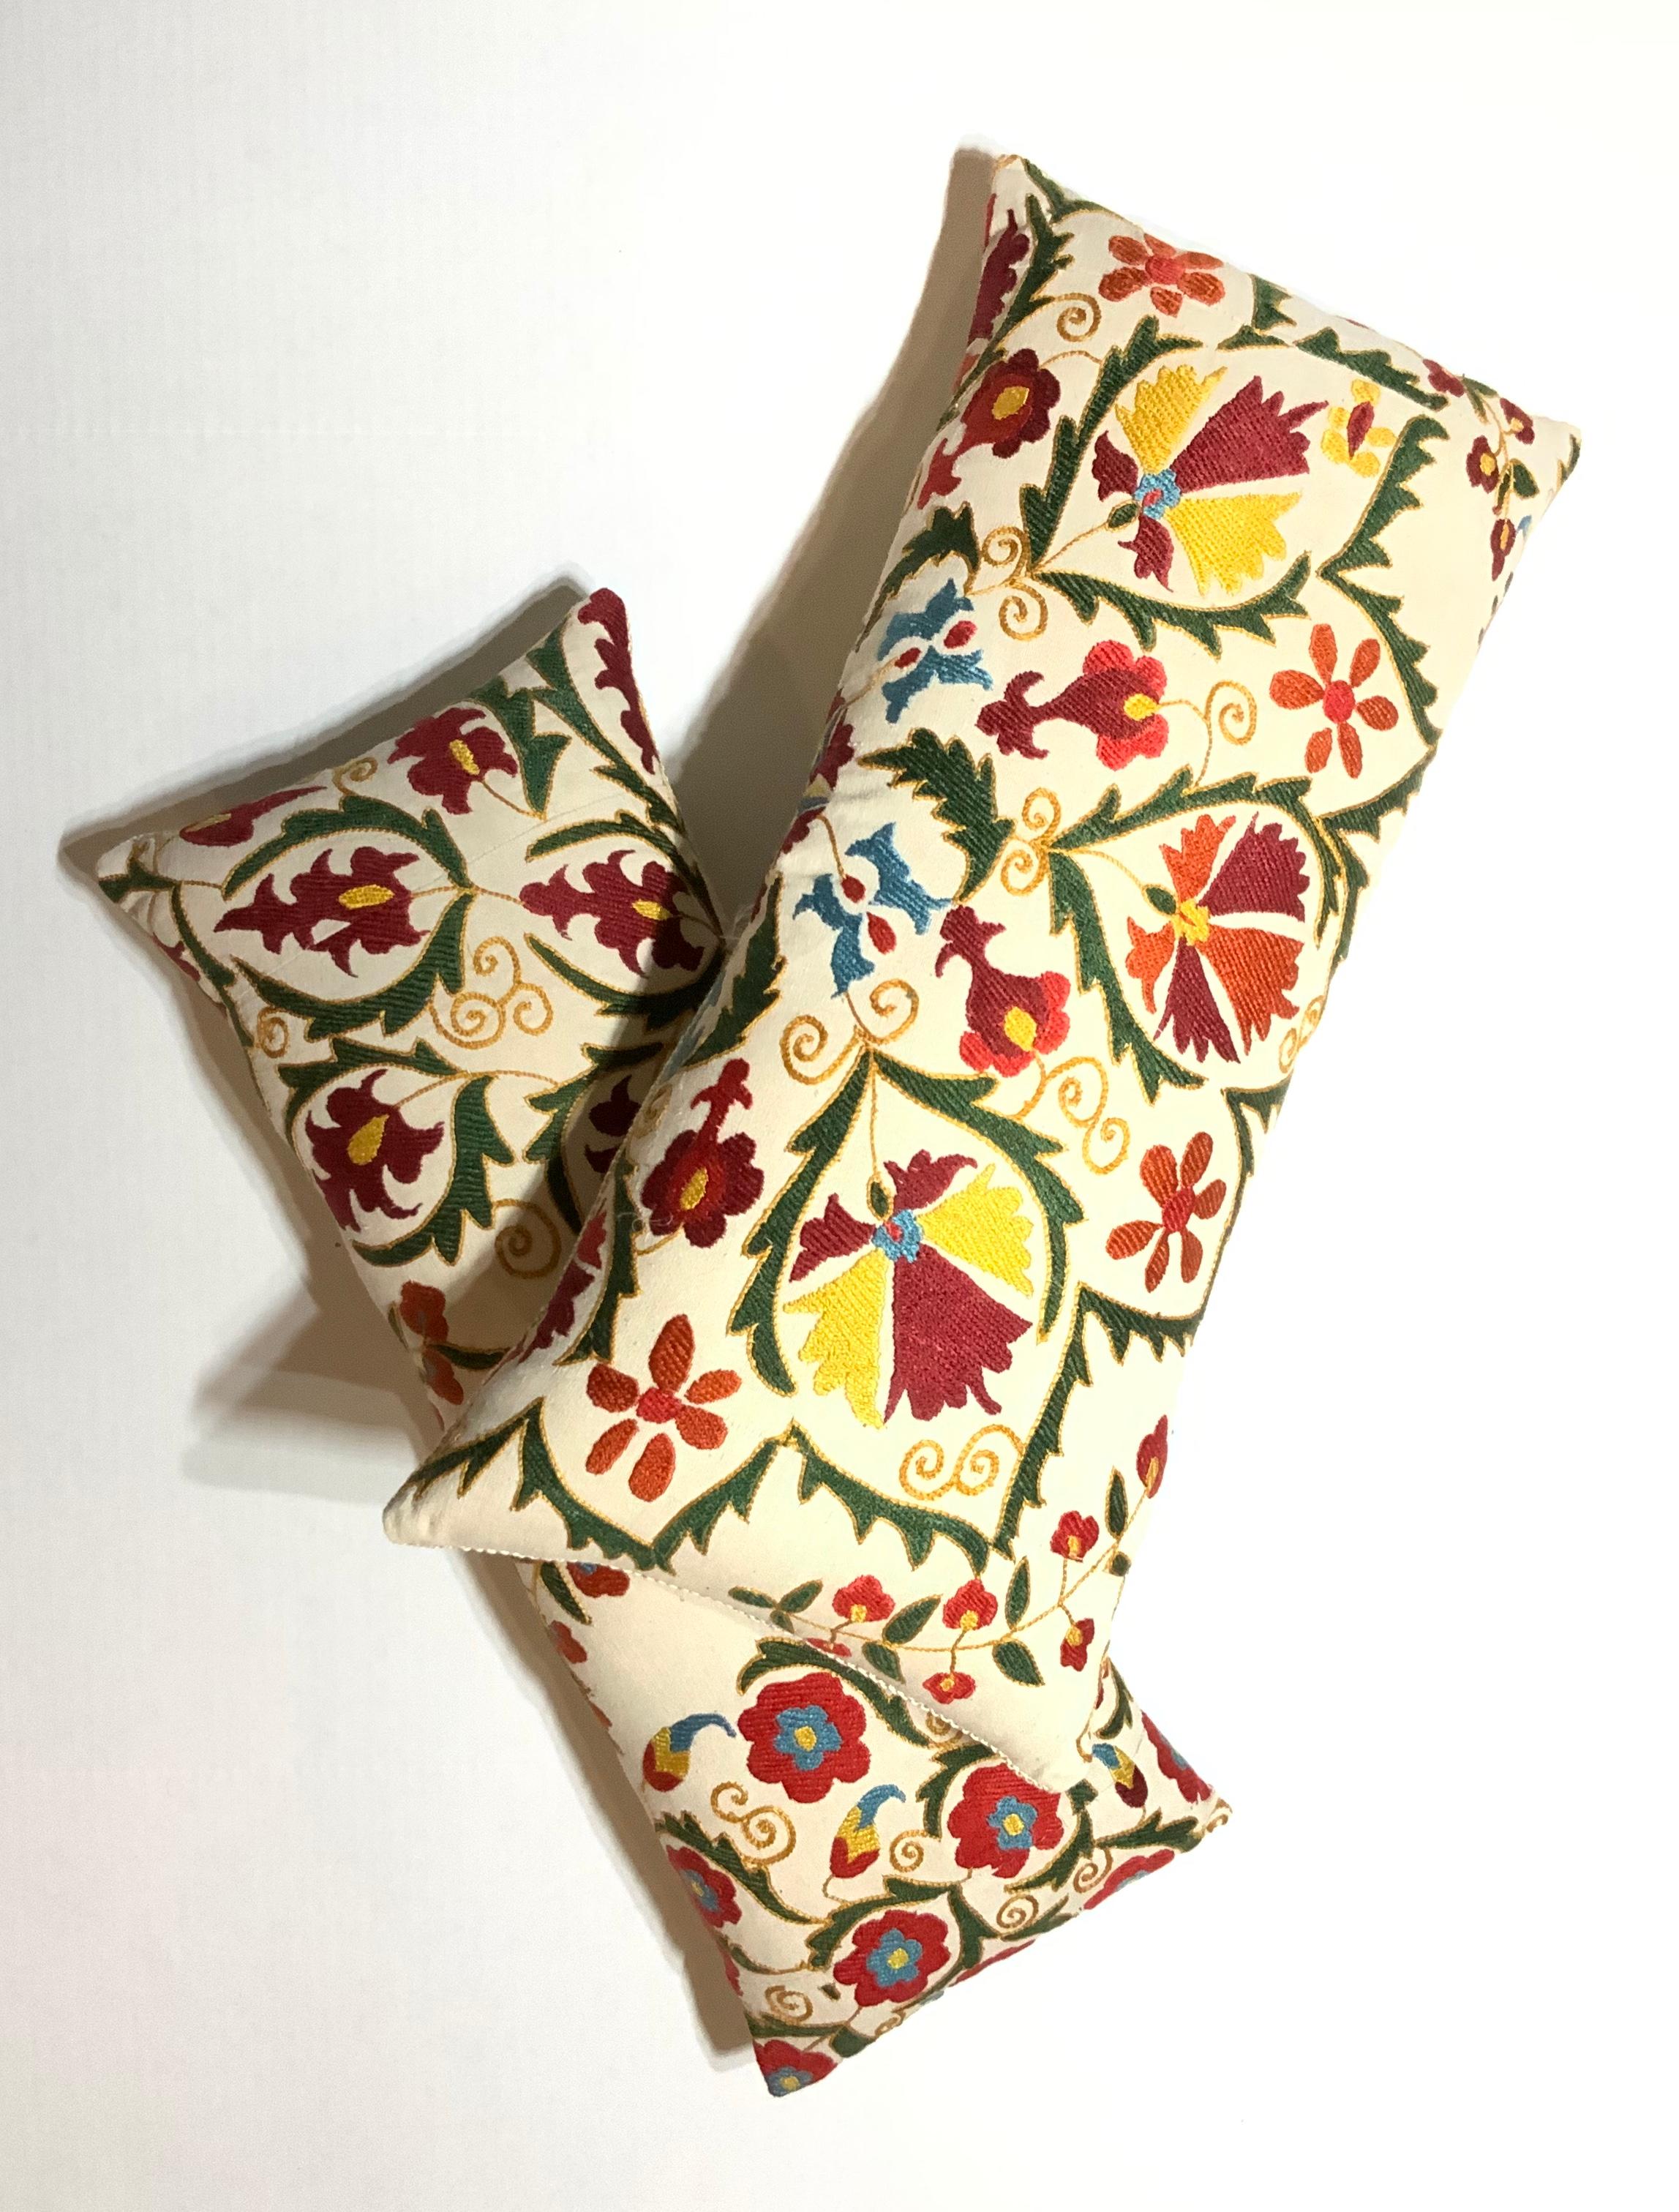 Pair of Embroidery Suzani Pillows 9